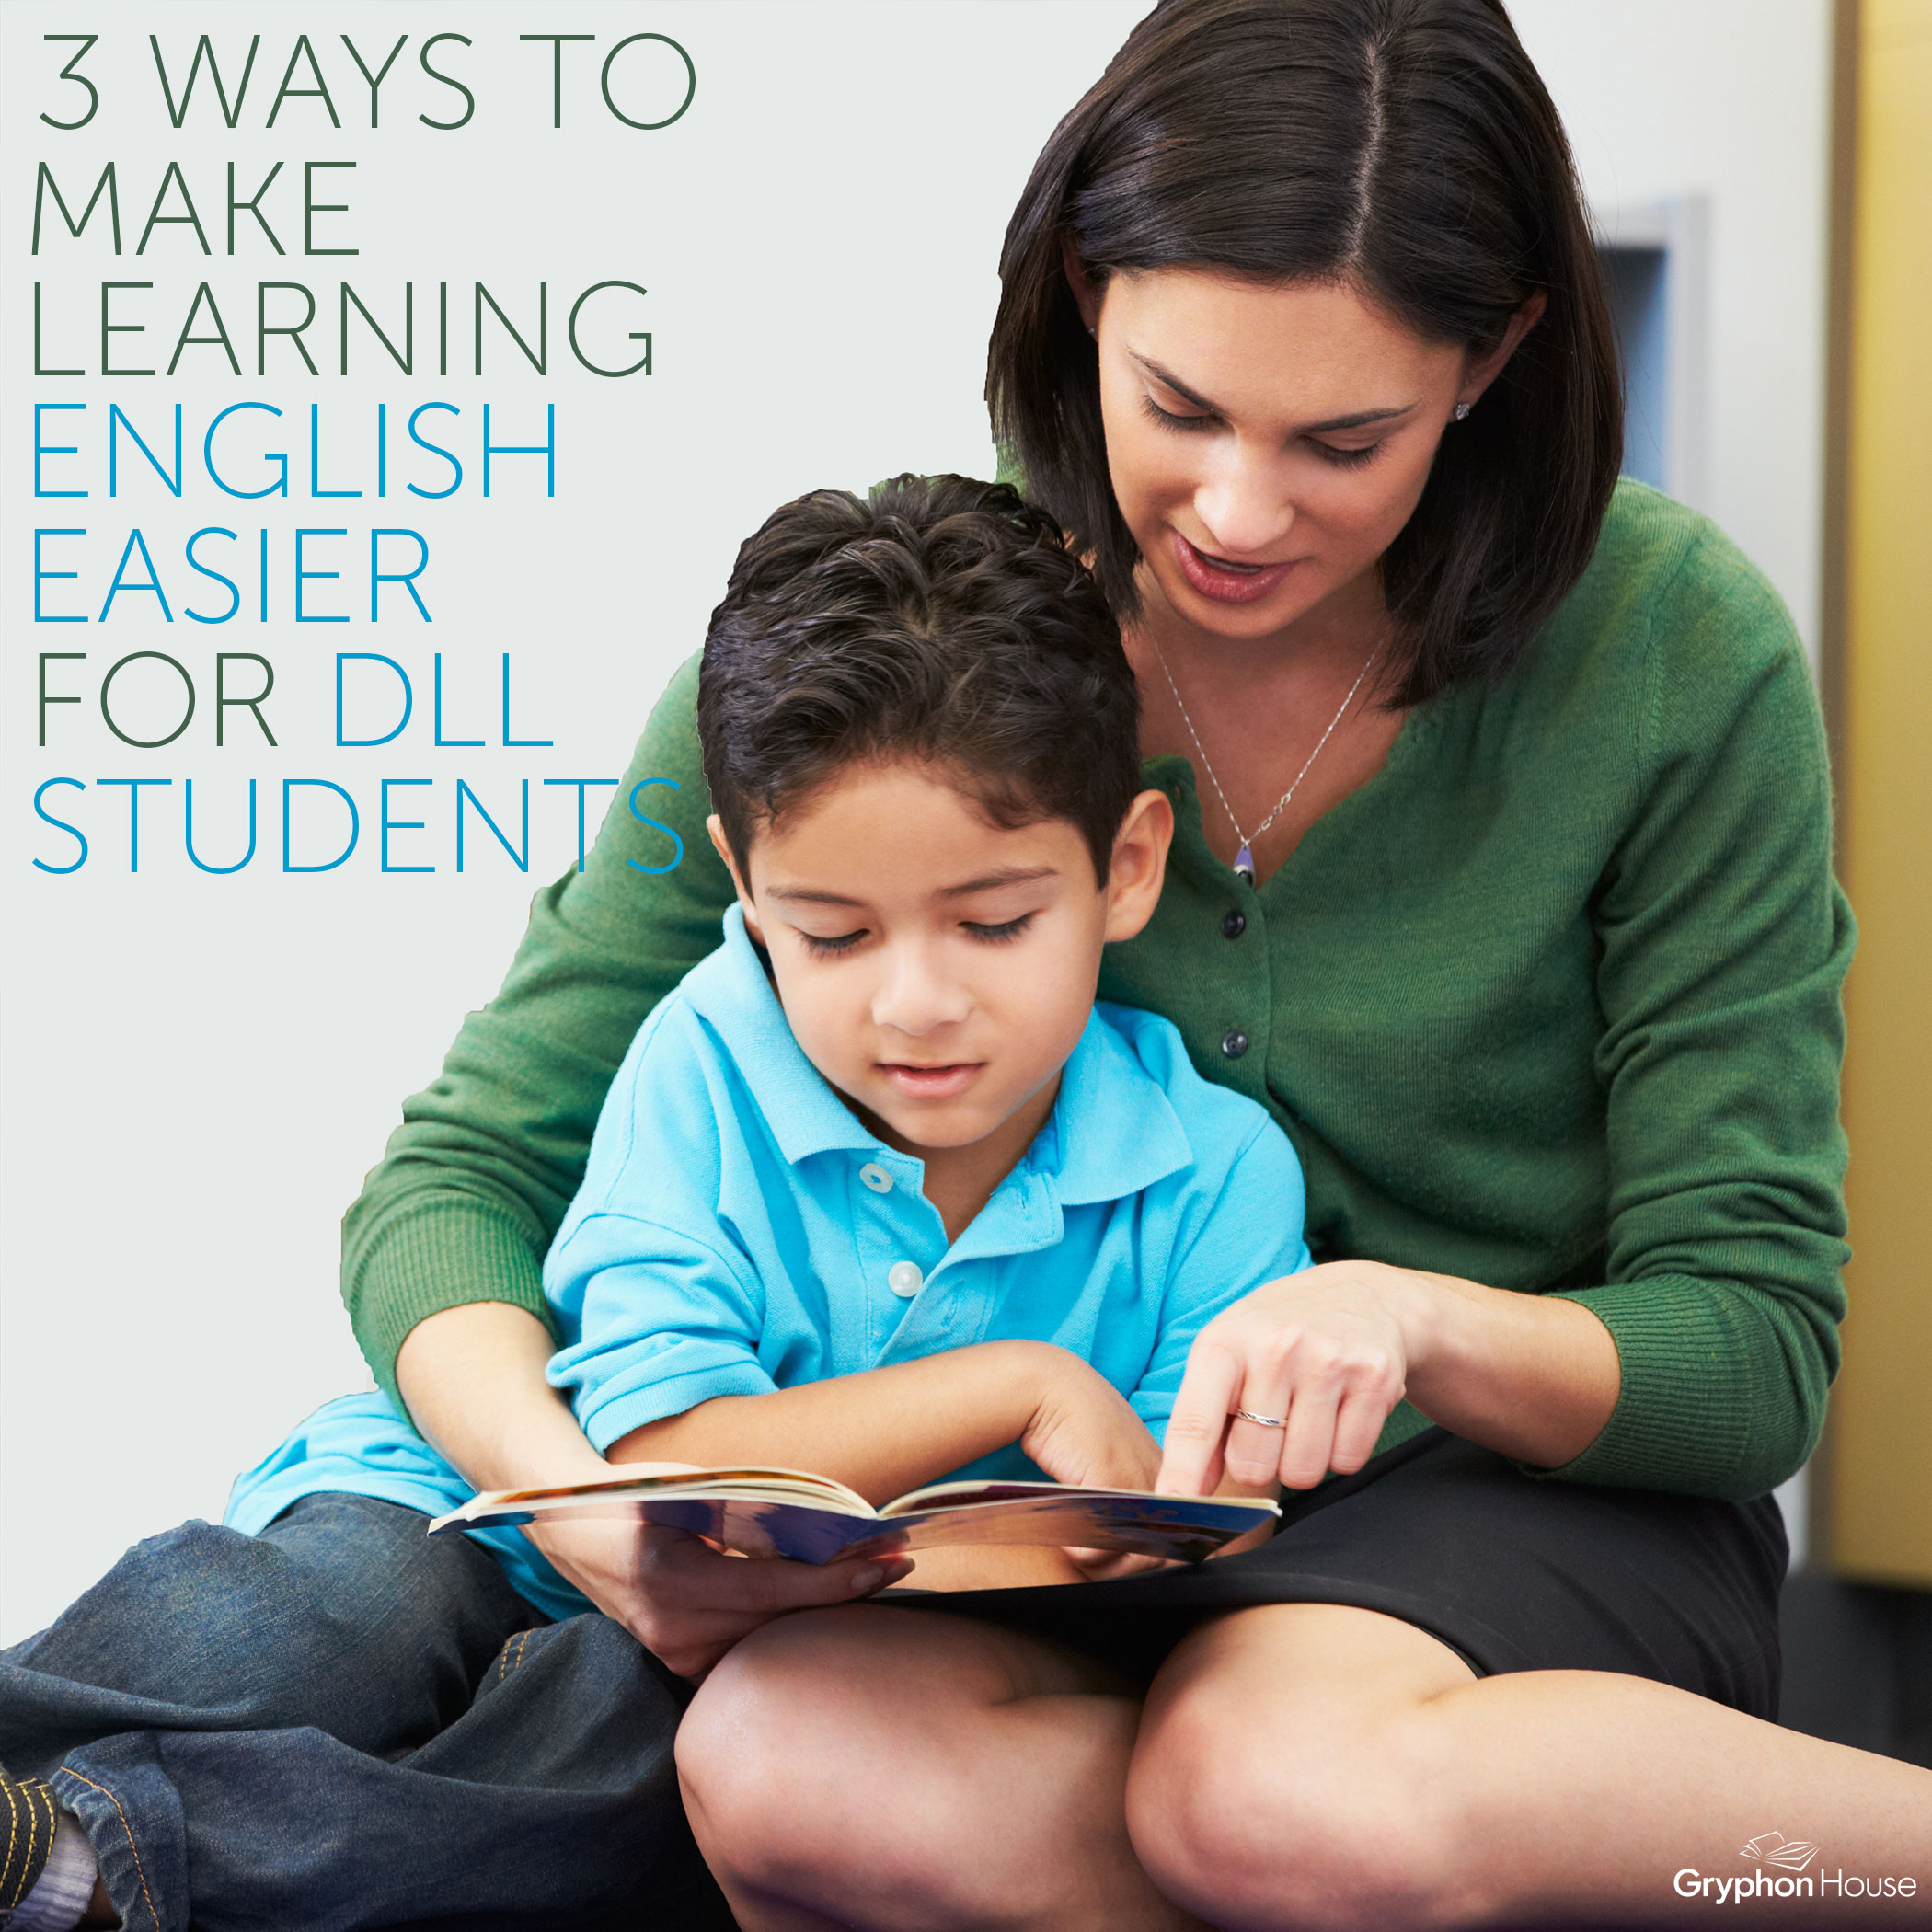 3 Ways to Make Learning English Easier for DLLs